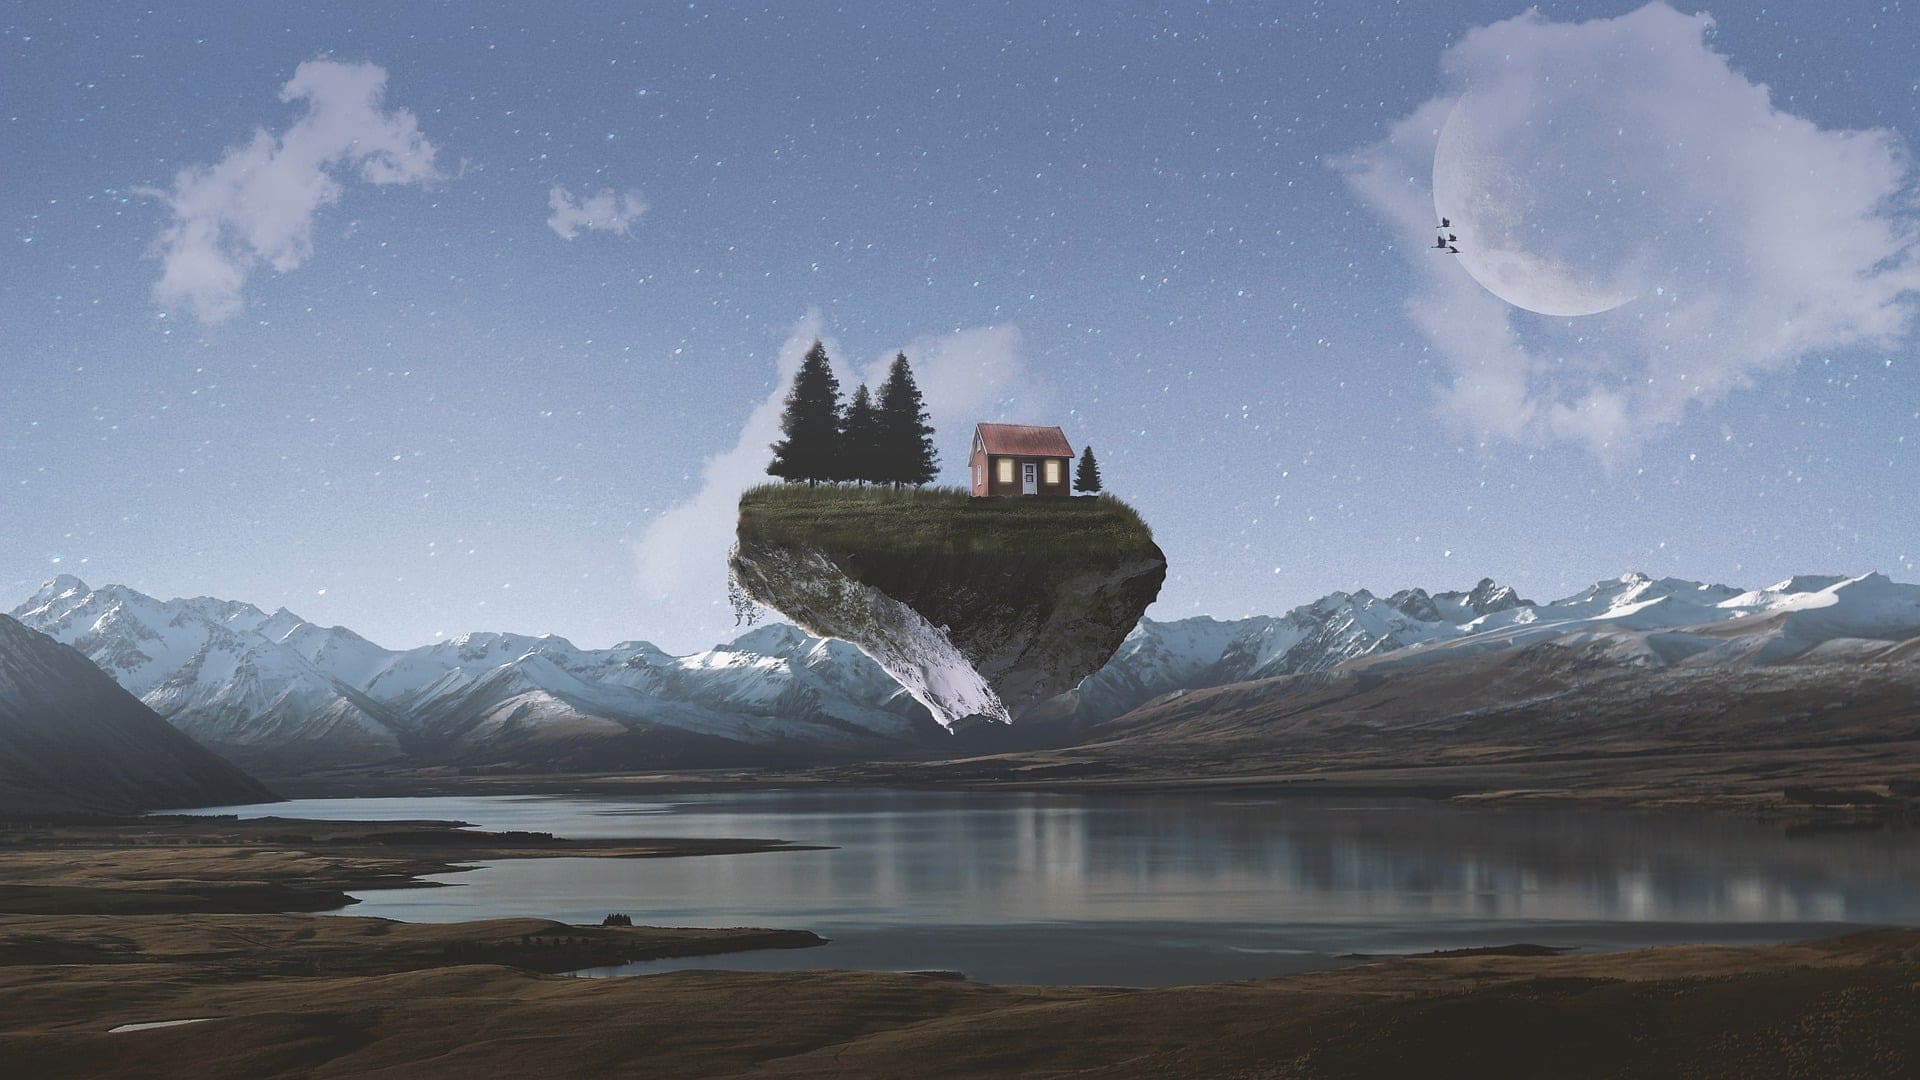 Illustration of house floating over lake by Psychofladoodle for Pixabay